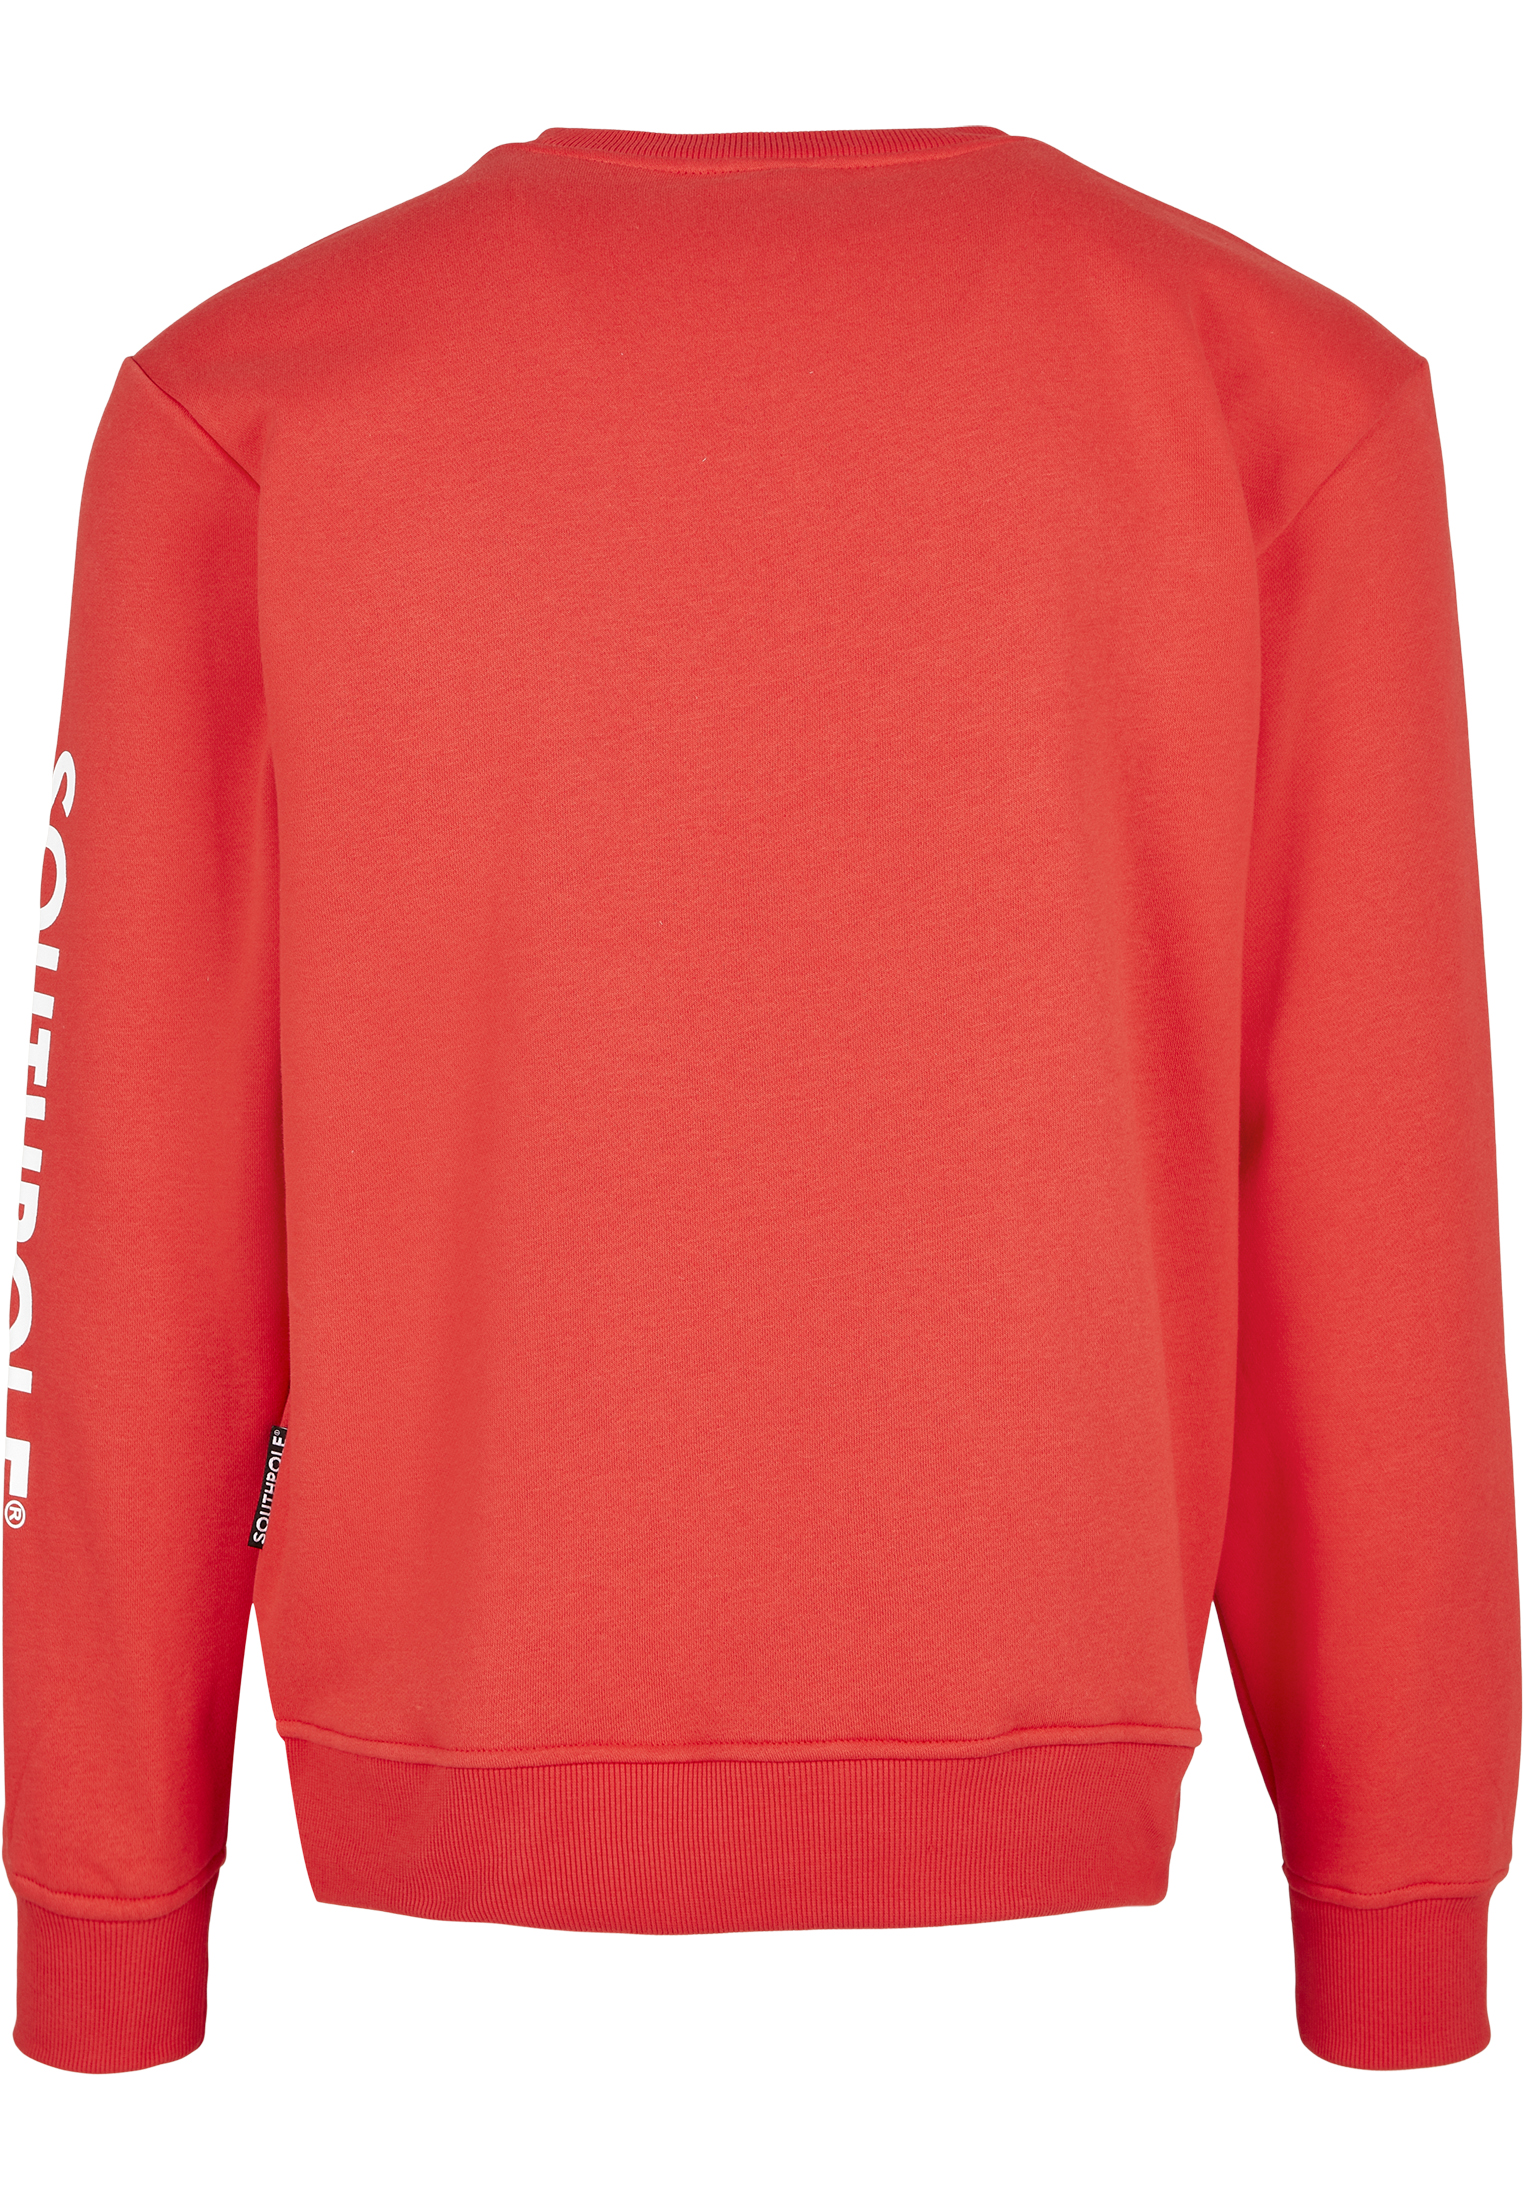 Saisonware Southpole 3D Crewneck in Farbe SP red